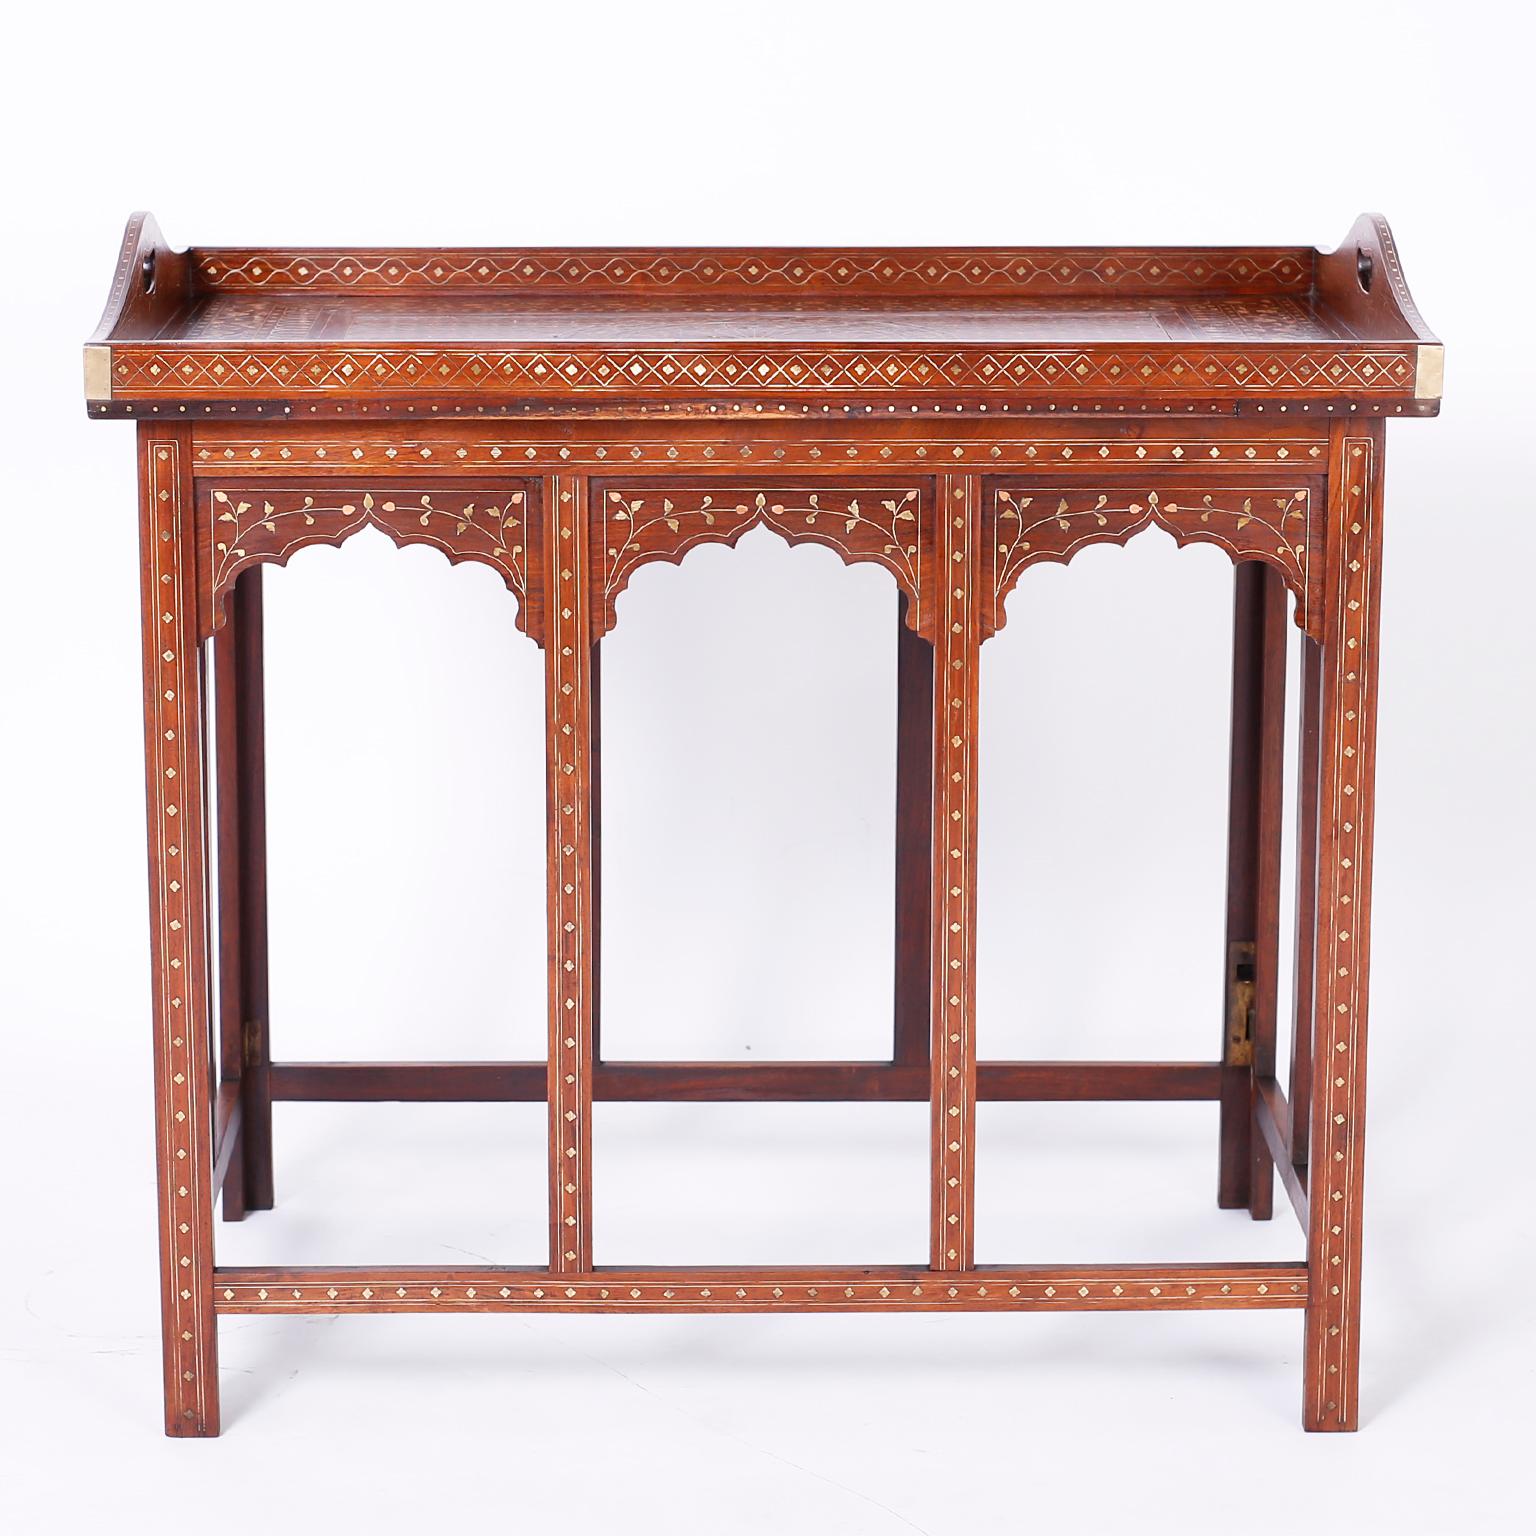 Antique Anglo-Indian table crafted in rosewood with a removable service tray on top masterfully inlaid with delicate floral designs in copper and brass. The base has architecturally interesting arches all around and is inlaid as well. Best of the